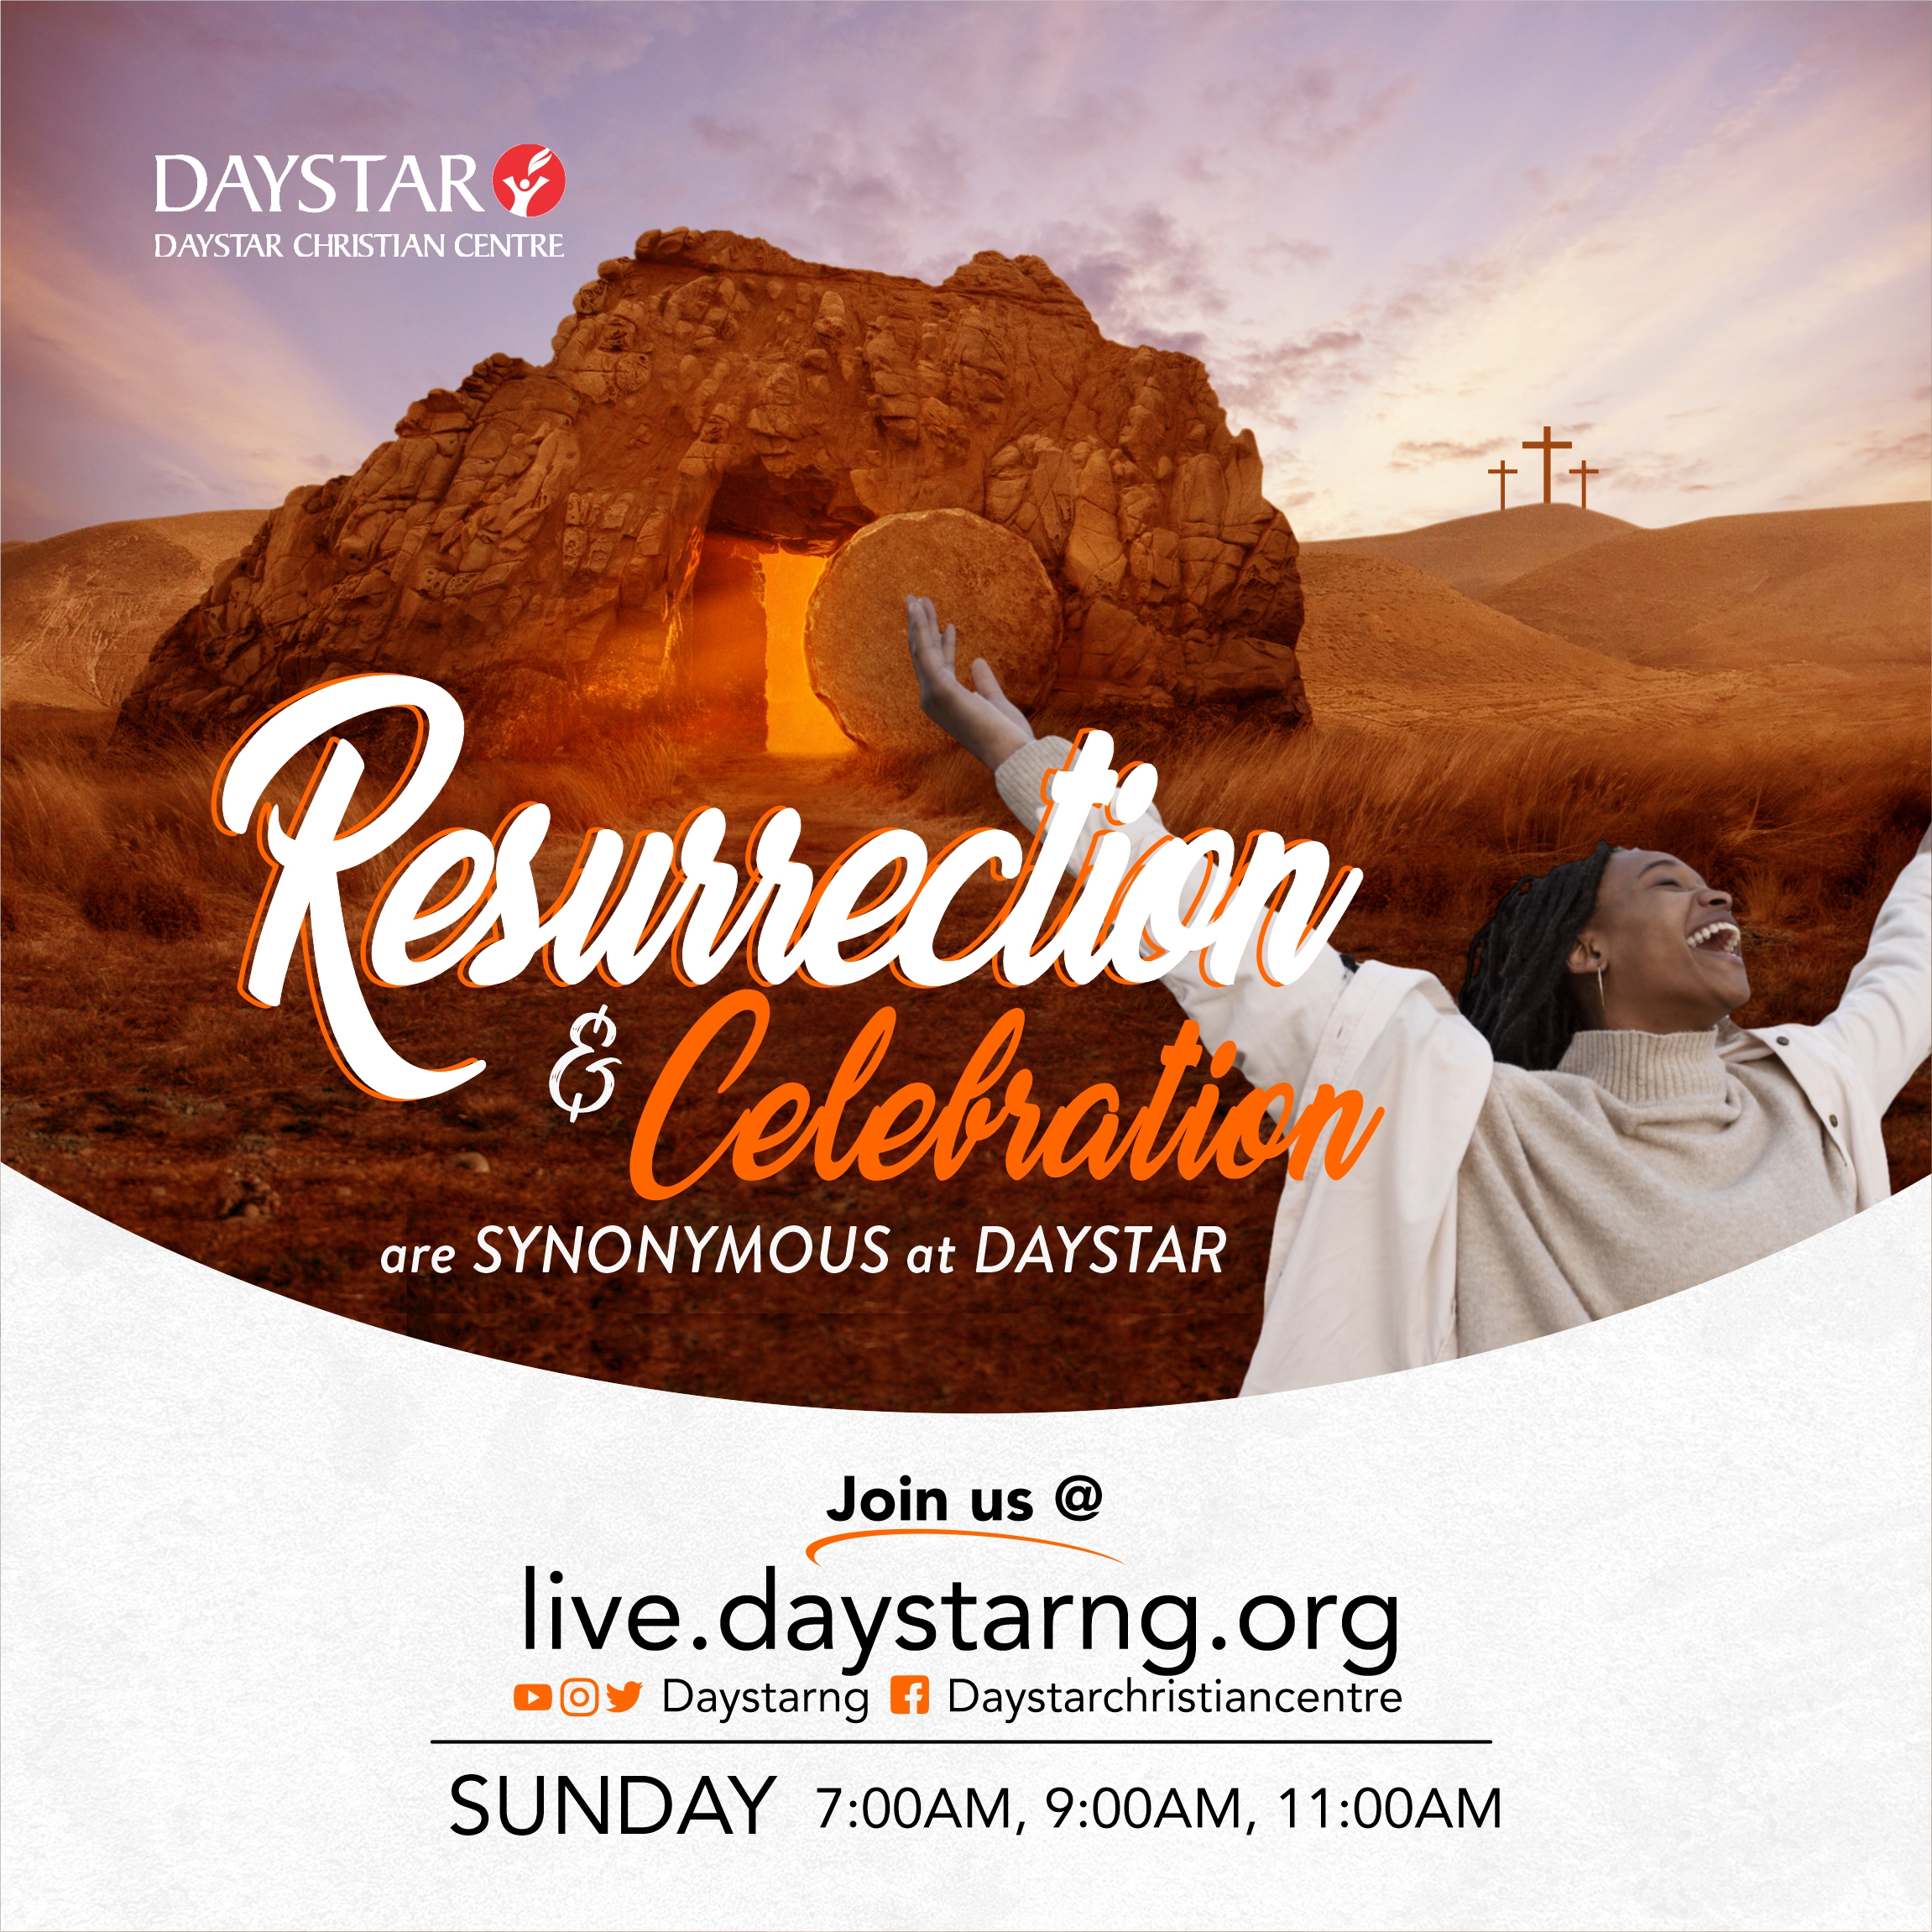 They met a Man | Daystar Christian Centre